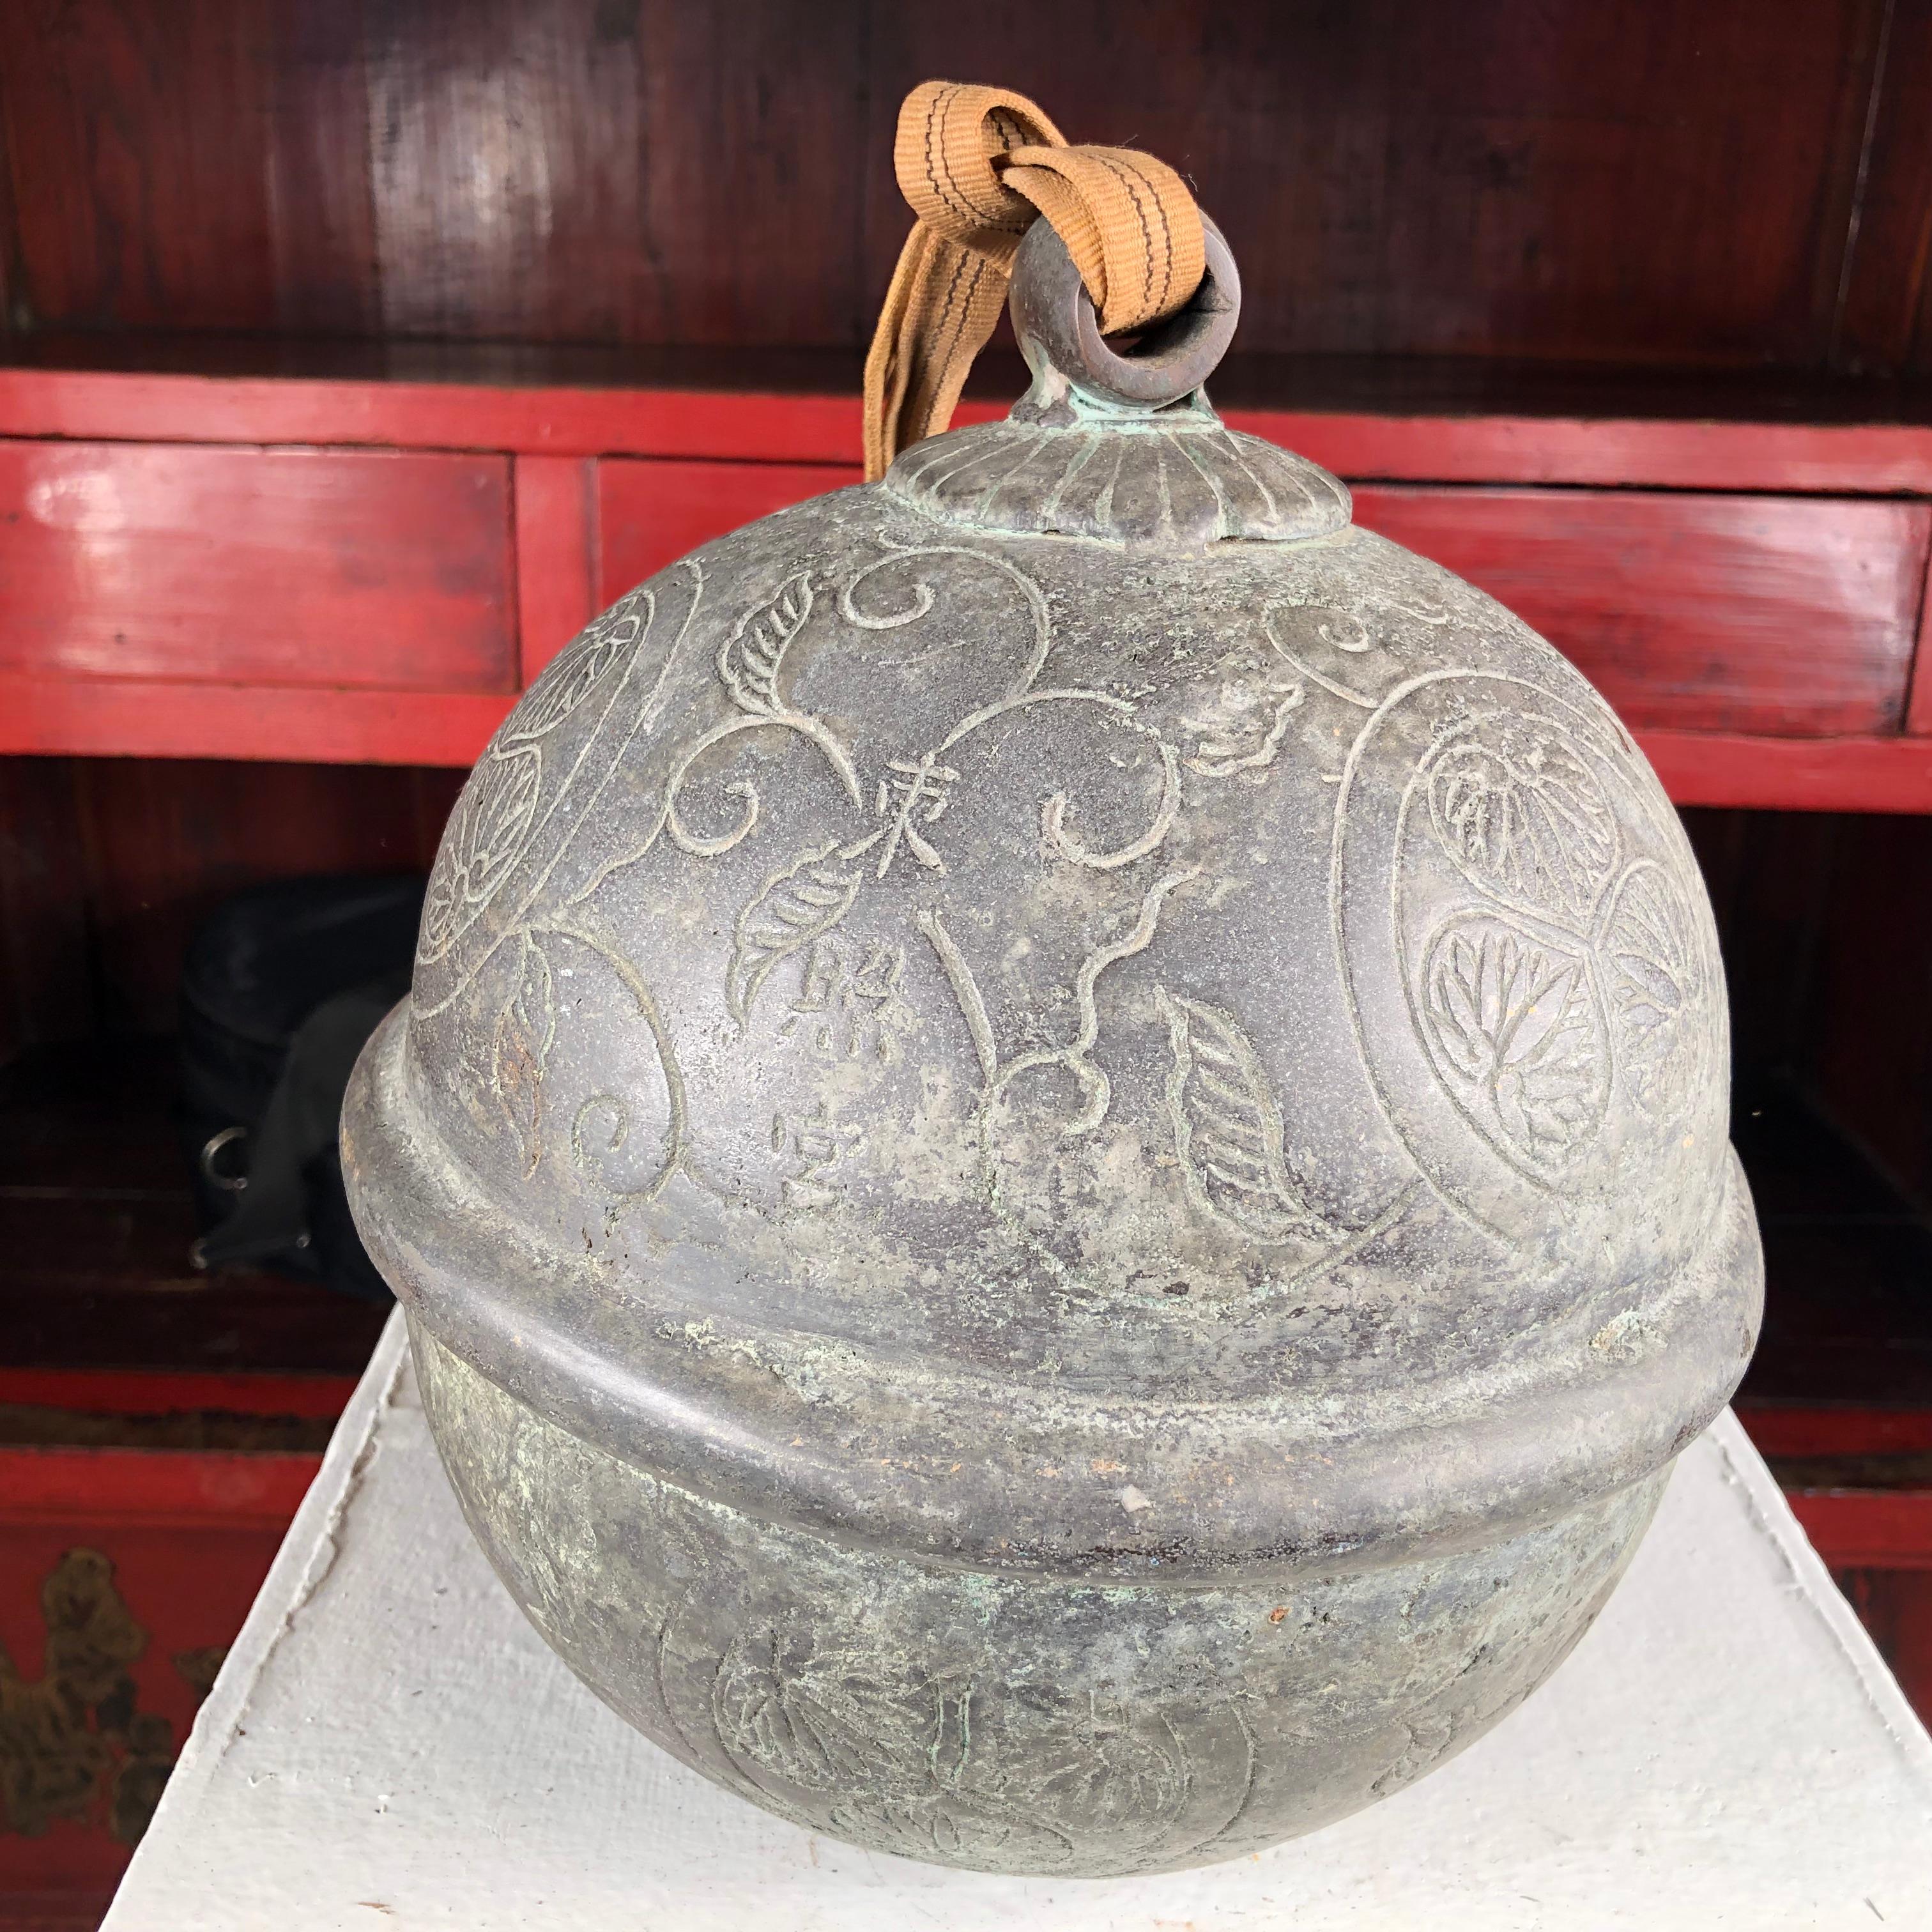 From our recent Japanese acquisitions travels.

Here's an extraordinary opportunity to collect and acquire the oldest and largest scale bell of this kind of bell we have ever seen in private hands- a Japanese authentic hand cast copper Shinto Suzu